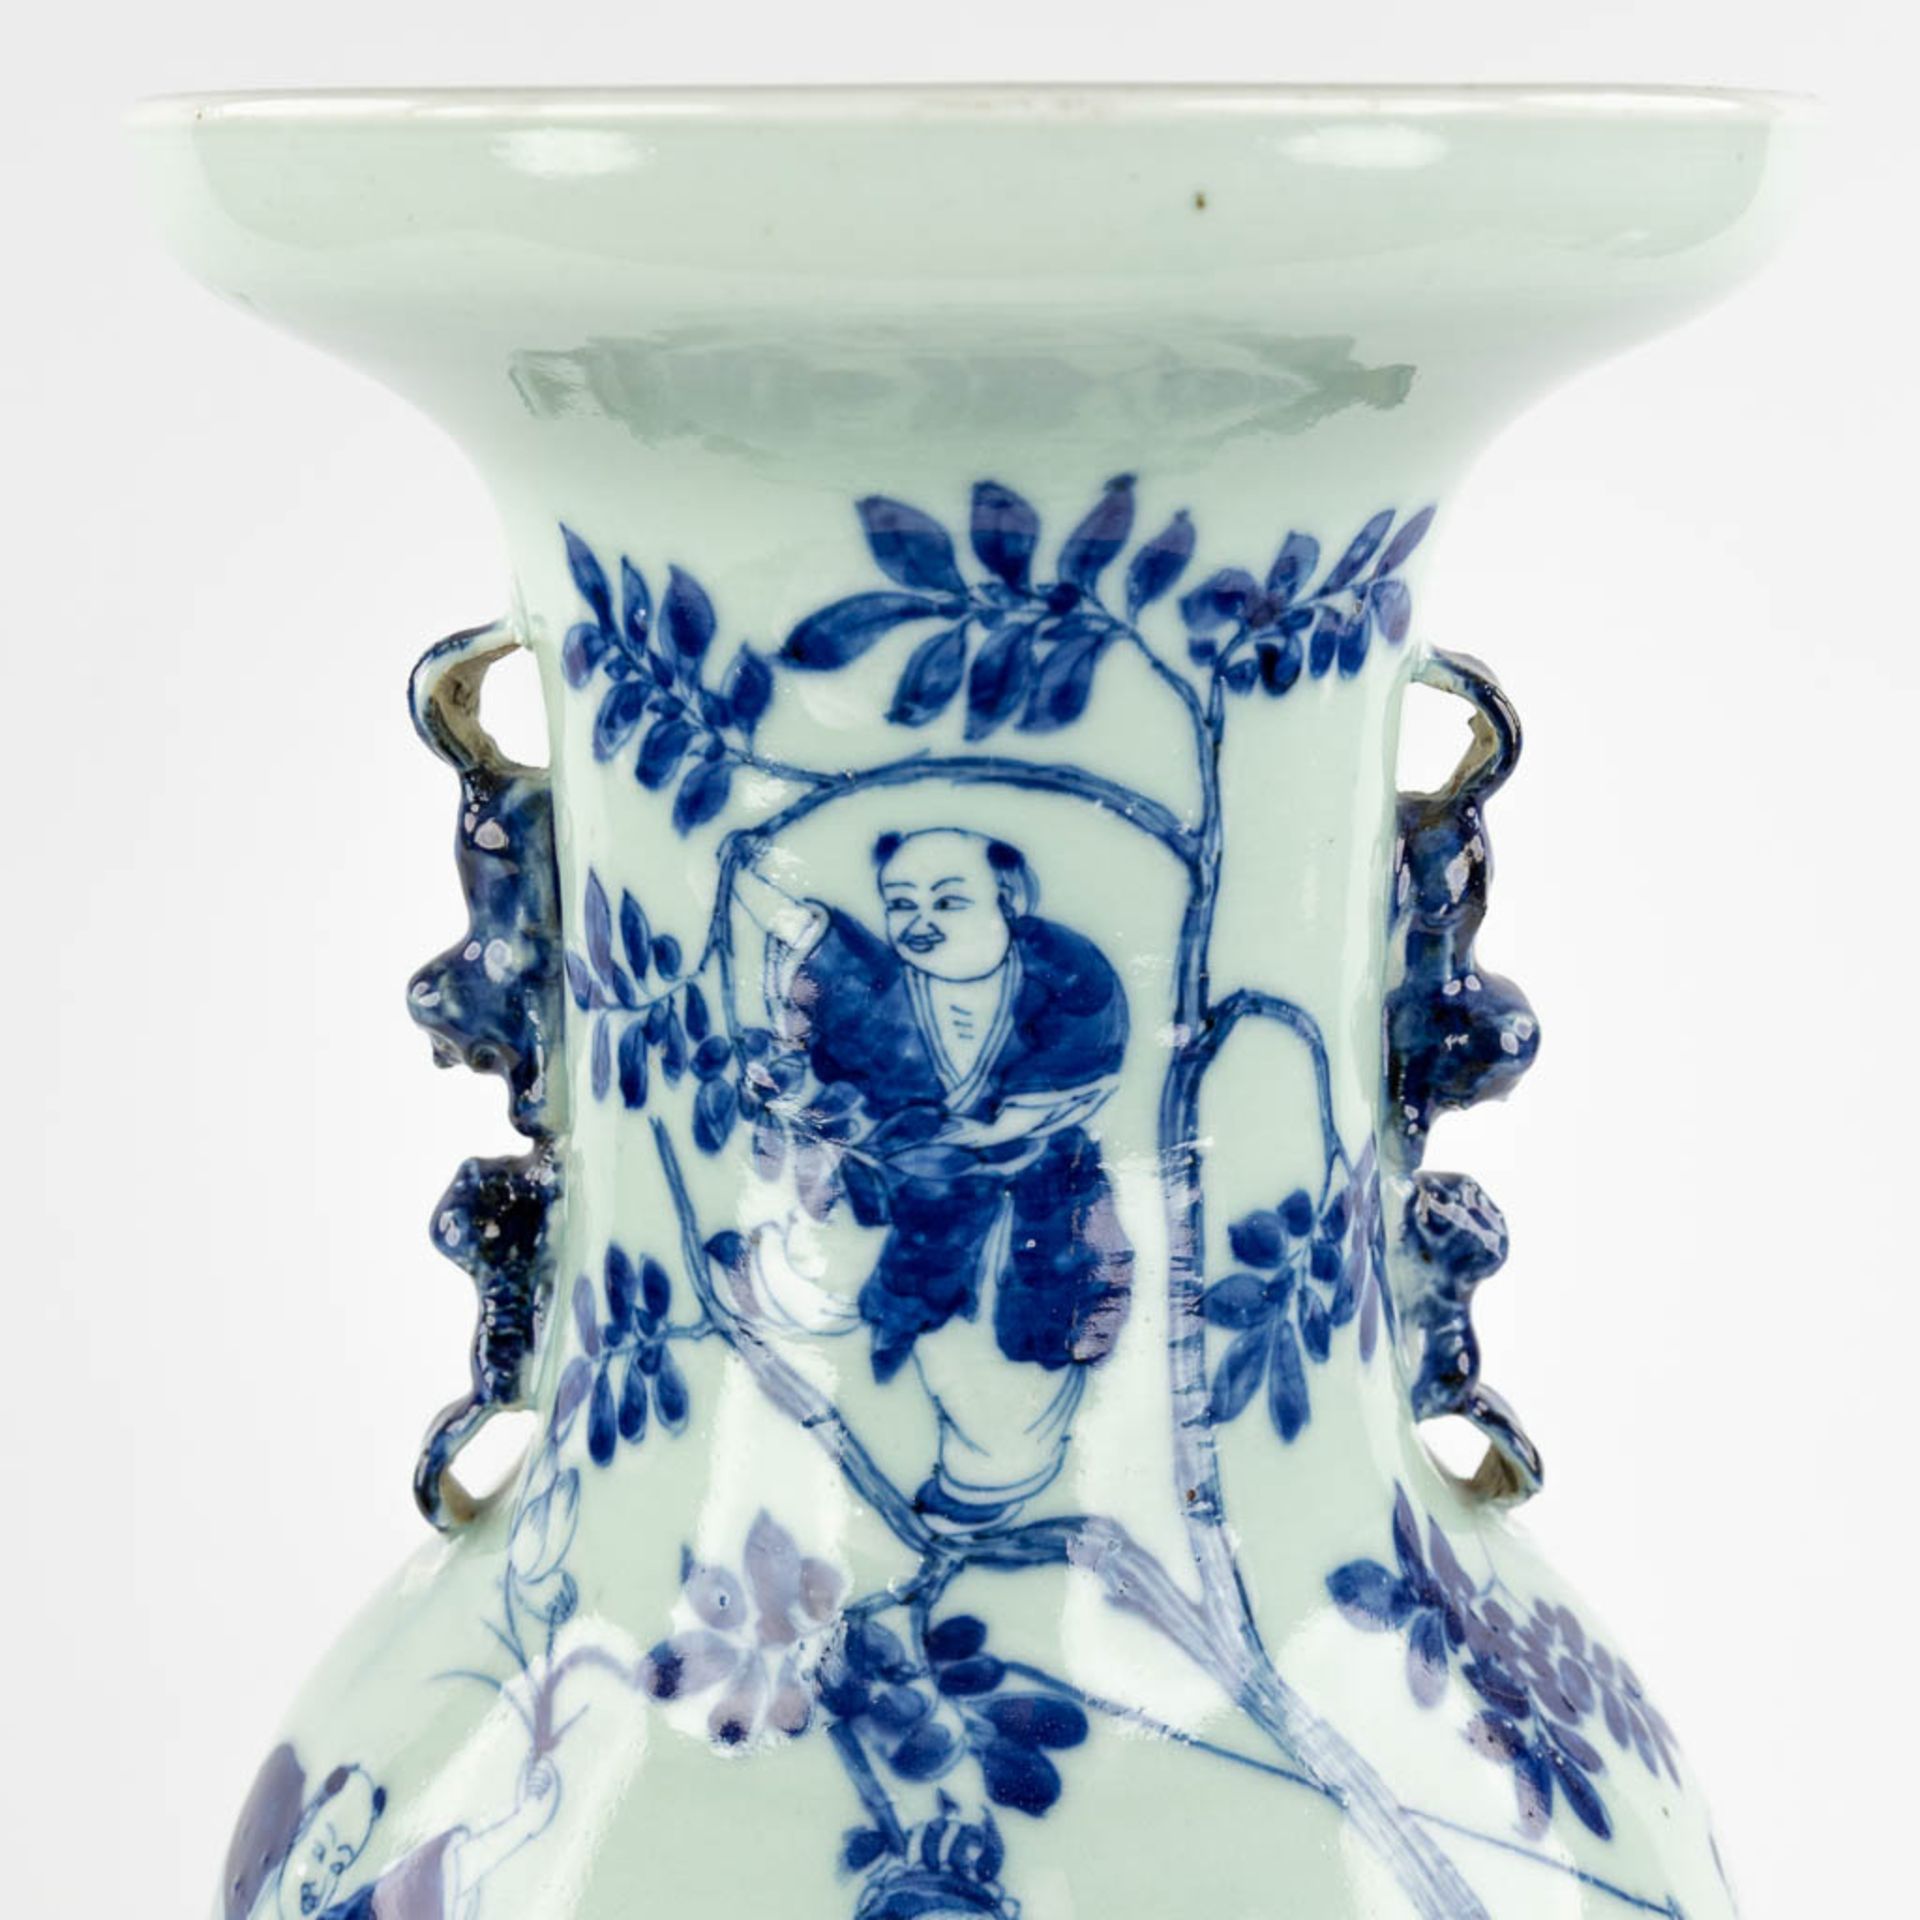 A Chinese celadon vase, blue-white, decorated with wise men. 19th/20th C. (H:59 x D:23 cm) - Image 9 of 16